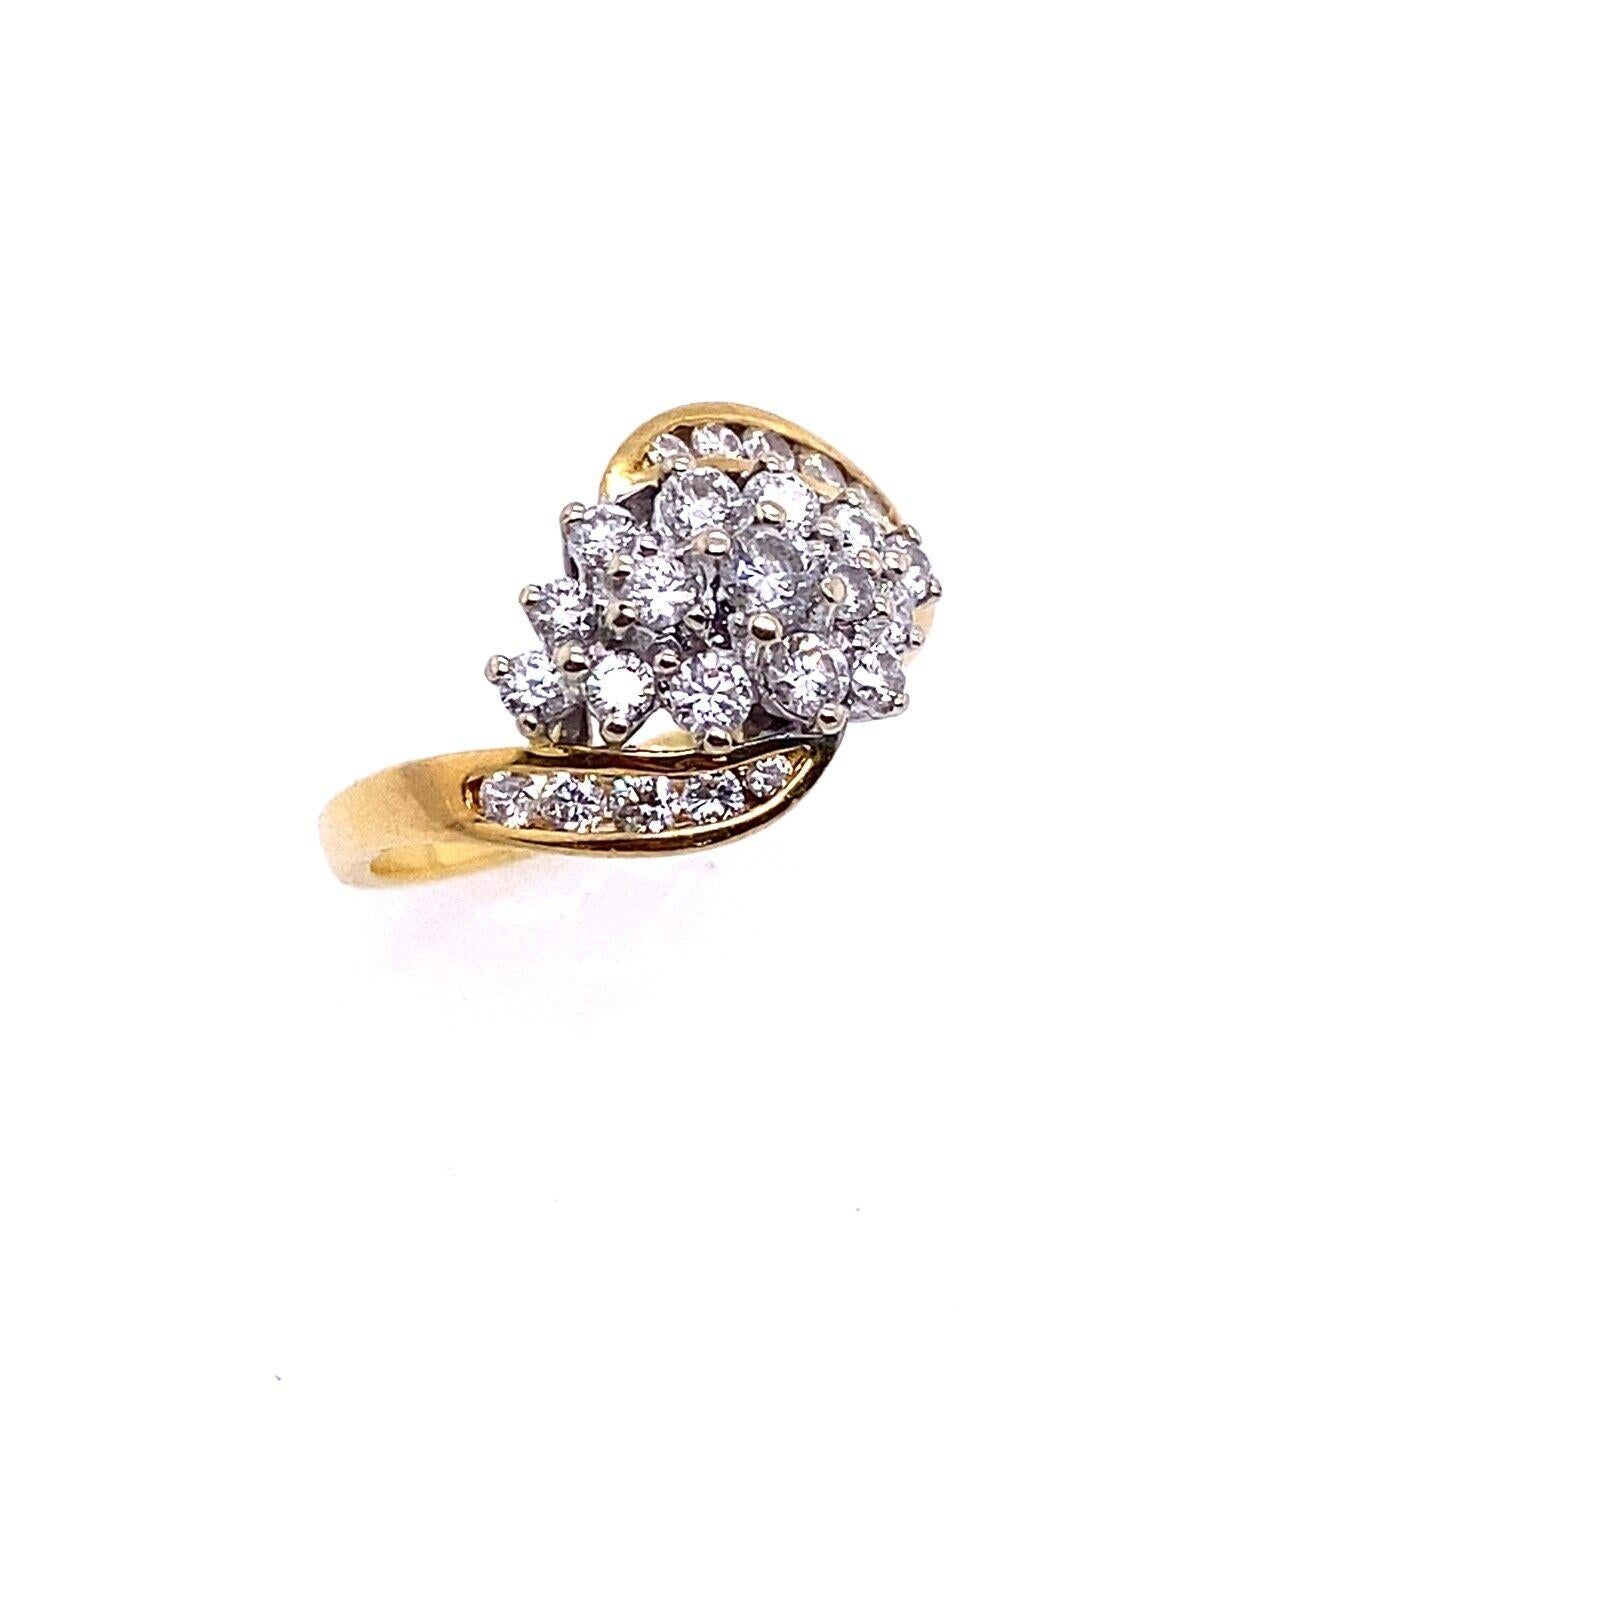 A cluster ring has a dazzling effect and is an excellent option for an engagement ring. This 18ct yellow and white gold ring is set with 0.70ct G/SI round brilliant cut diamonds and is accompanied by a Beaverbrooks Diamond Certificate.

Additional